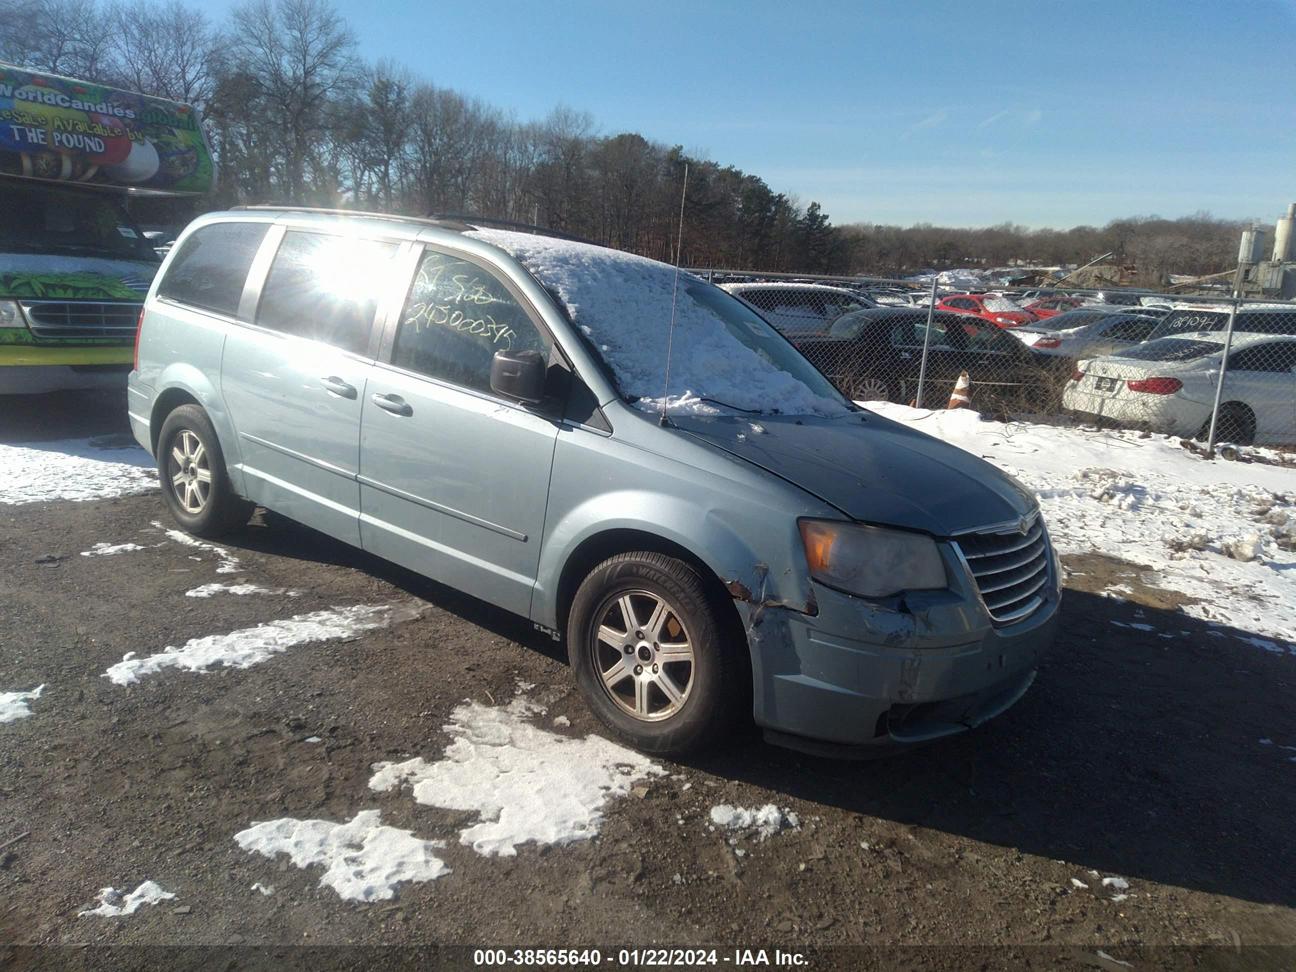 vin: 2A8HR54P08R769475 2A8HR54P08R769475 2008 chrysler town & country 3800 for Sale in 11763, 156 Peconic Ave, Medford, USA